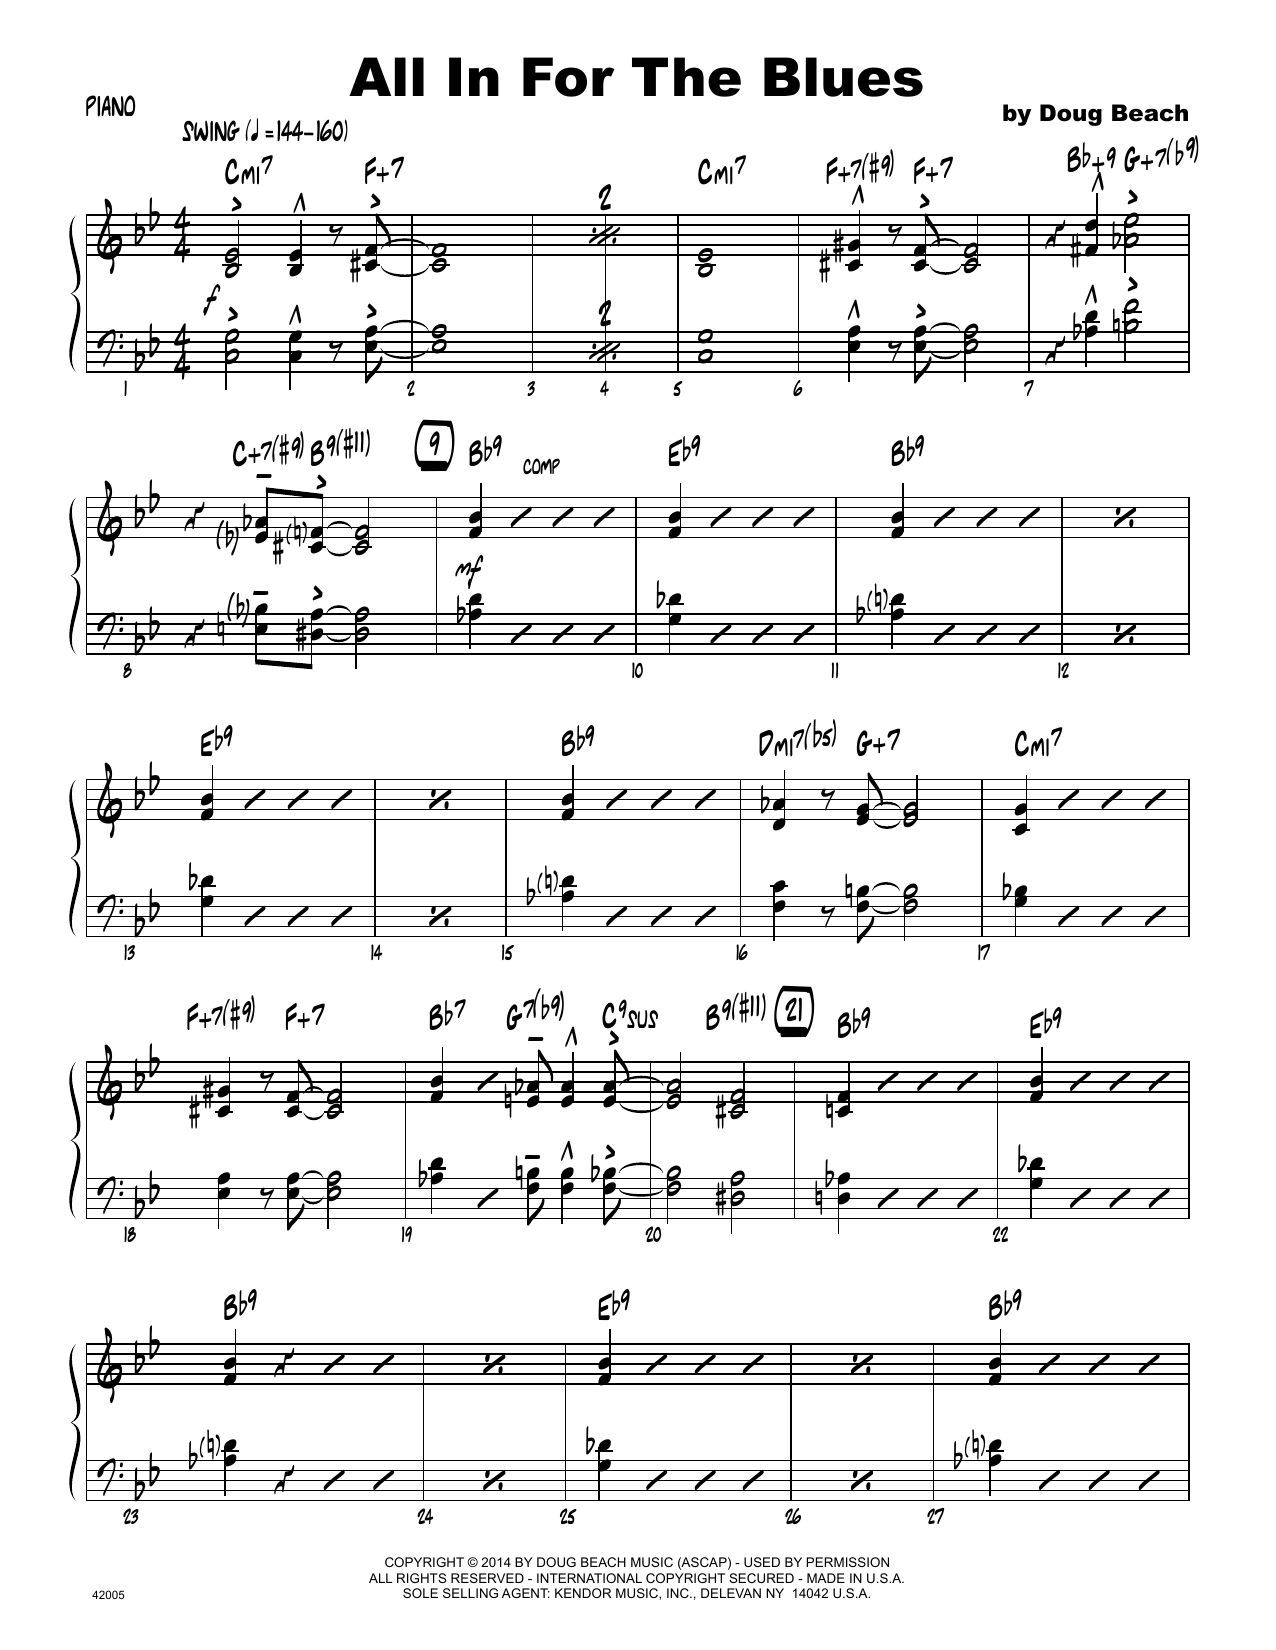 Download Doug Beach All In For The Blues - Piano Sheet Music